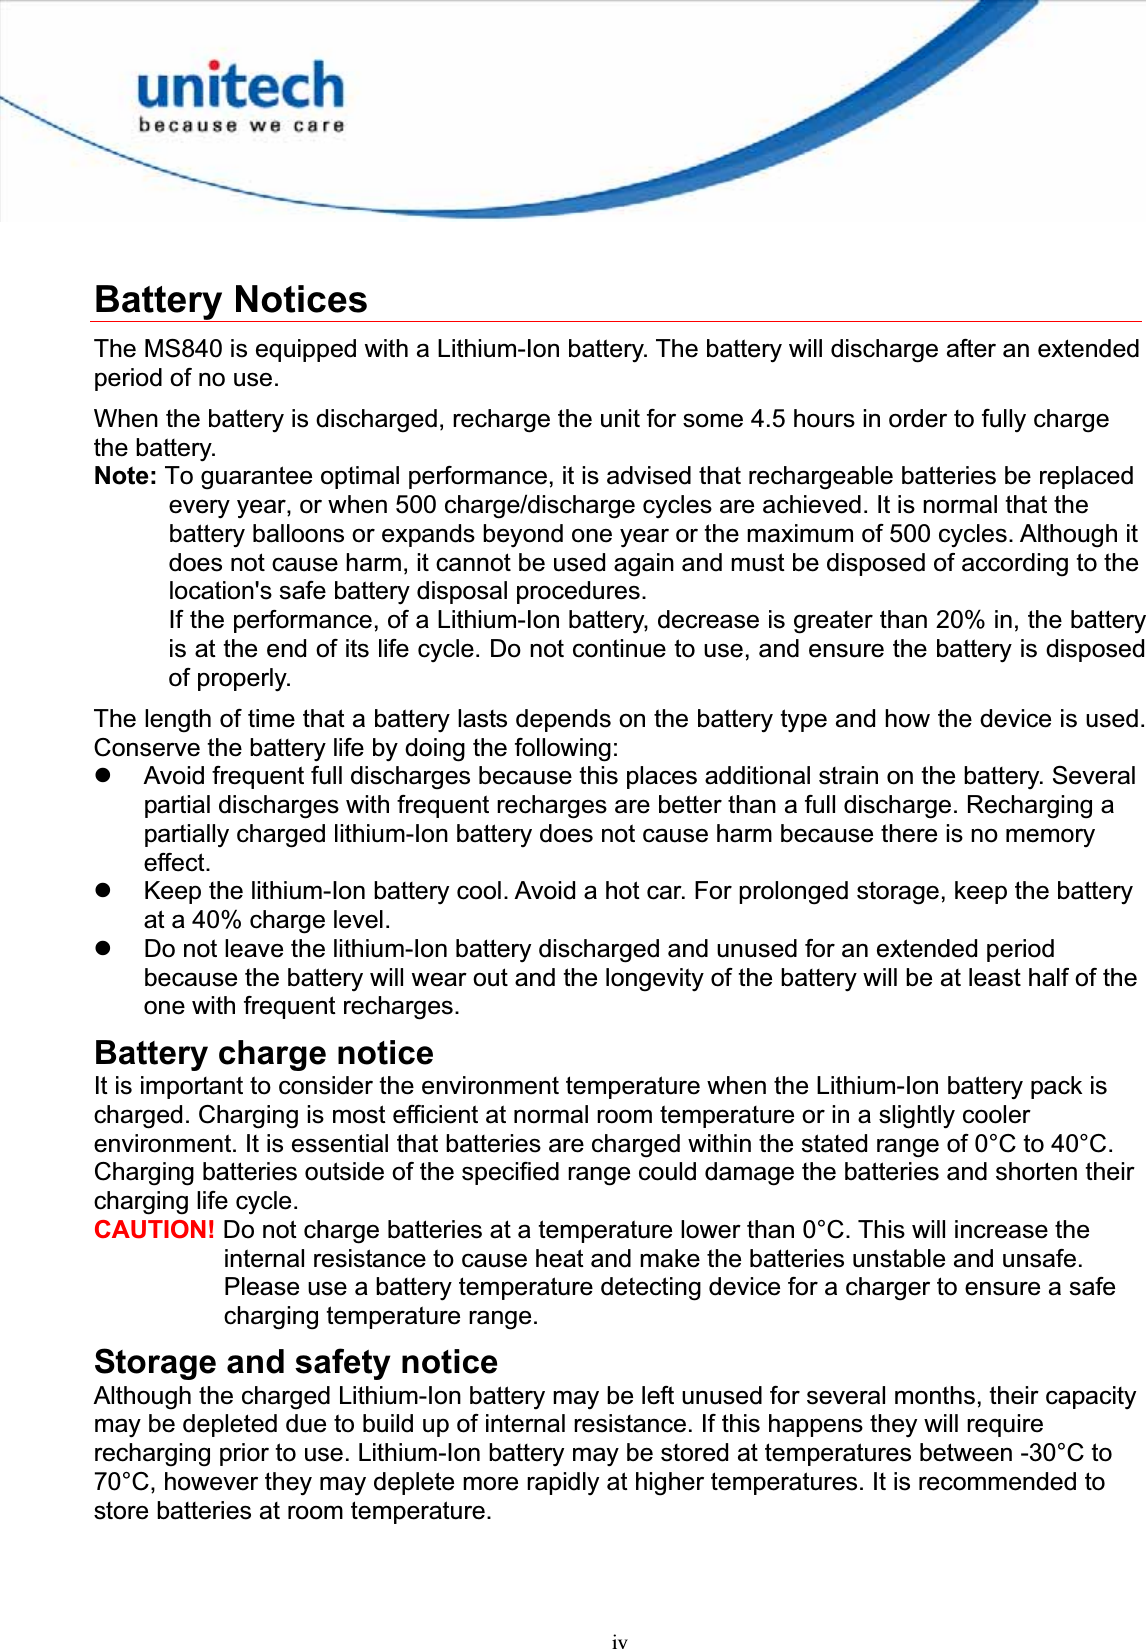 ivBattery Notices The MS840 is equipped with a Lithium-Ion battery. The battery will discharge after an extended period of no use. When the battery is discharged, recharge the unit for some 4.5 hours in order to fully charge the battery.   Note: To guarantee optimal performance, it is advised that rechargeable batteries be replaced every year, or when 500 charge/discharge cycles are achieved. It is normal that the battery balloons or expands beyond one year or the maximum of 500 cycles. Although it does not cause harm, it cannot be used again and must be disposed of according to the location&apos;s safe battery disposal procedures. If the performance, of a Lithium-Ion battery, decrease is greater than 20% in, the battery is at the end of its life cycle. Do not continue to use, and ensure the battery is disposed of properly. The length of time that a battery lasts depends on the battery type and how the device is used. Conserve the battery life by doing the following: z Avoid frequent full discharges because this places additional strain on the battery. Several partial discharges with frequent recharges are better than a full discharge. Recharging a partially charged lithium-Ion battery does not cause harm because there is no memory effect. z Keep the lithium-Ion battery cool. Avoid a hot car. For prolonged storage, keep the battery at a 40% charge level. z Do not leave the lithium-Ion battery discharged and unused for an extended period because the battery will wear out and the longevity of the battery will be at least half of the one with frequent recharges. Battery charge notice It is important to consider the environment temperature when the Lithium-Ion battery pack is charged. Charging is most efficient at normal room temperature or in a slightly cooler environment. It is essential that batteries are charged within the stated range of 0°C to 40°C. Charging batteries outside of the specified range could damage the batteries and shorten their charging life cycle. CAUTION! Do not charge batteries at a temperature lower than 0°C. This will increase the internal resistance to cause heat and make the batteries unstable and unsafe. Please use a battery temperature detecting device for a charger to ensure a safe charging temperature range. Storage and safety notice Although the charged Lithium-Ion battery may be left unused for several months, their capacity may be depleted due to build up of internal resistance. If this happens they will require recharging prior to use. Lithium-Ion battery may be stored at temperatures between -30°C to 70°C, however they may deplete more rapidly at higher temperatures. It is recommended to store batteries at room temperature. 